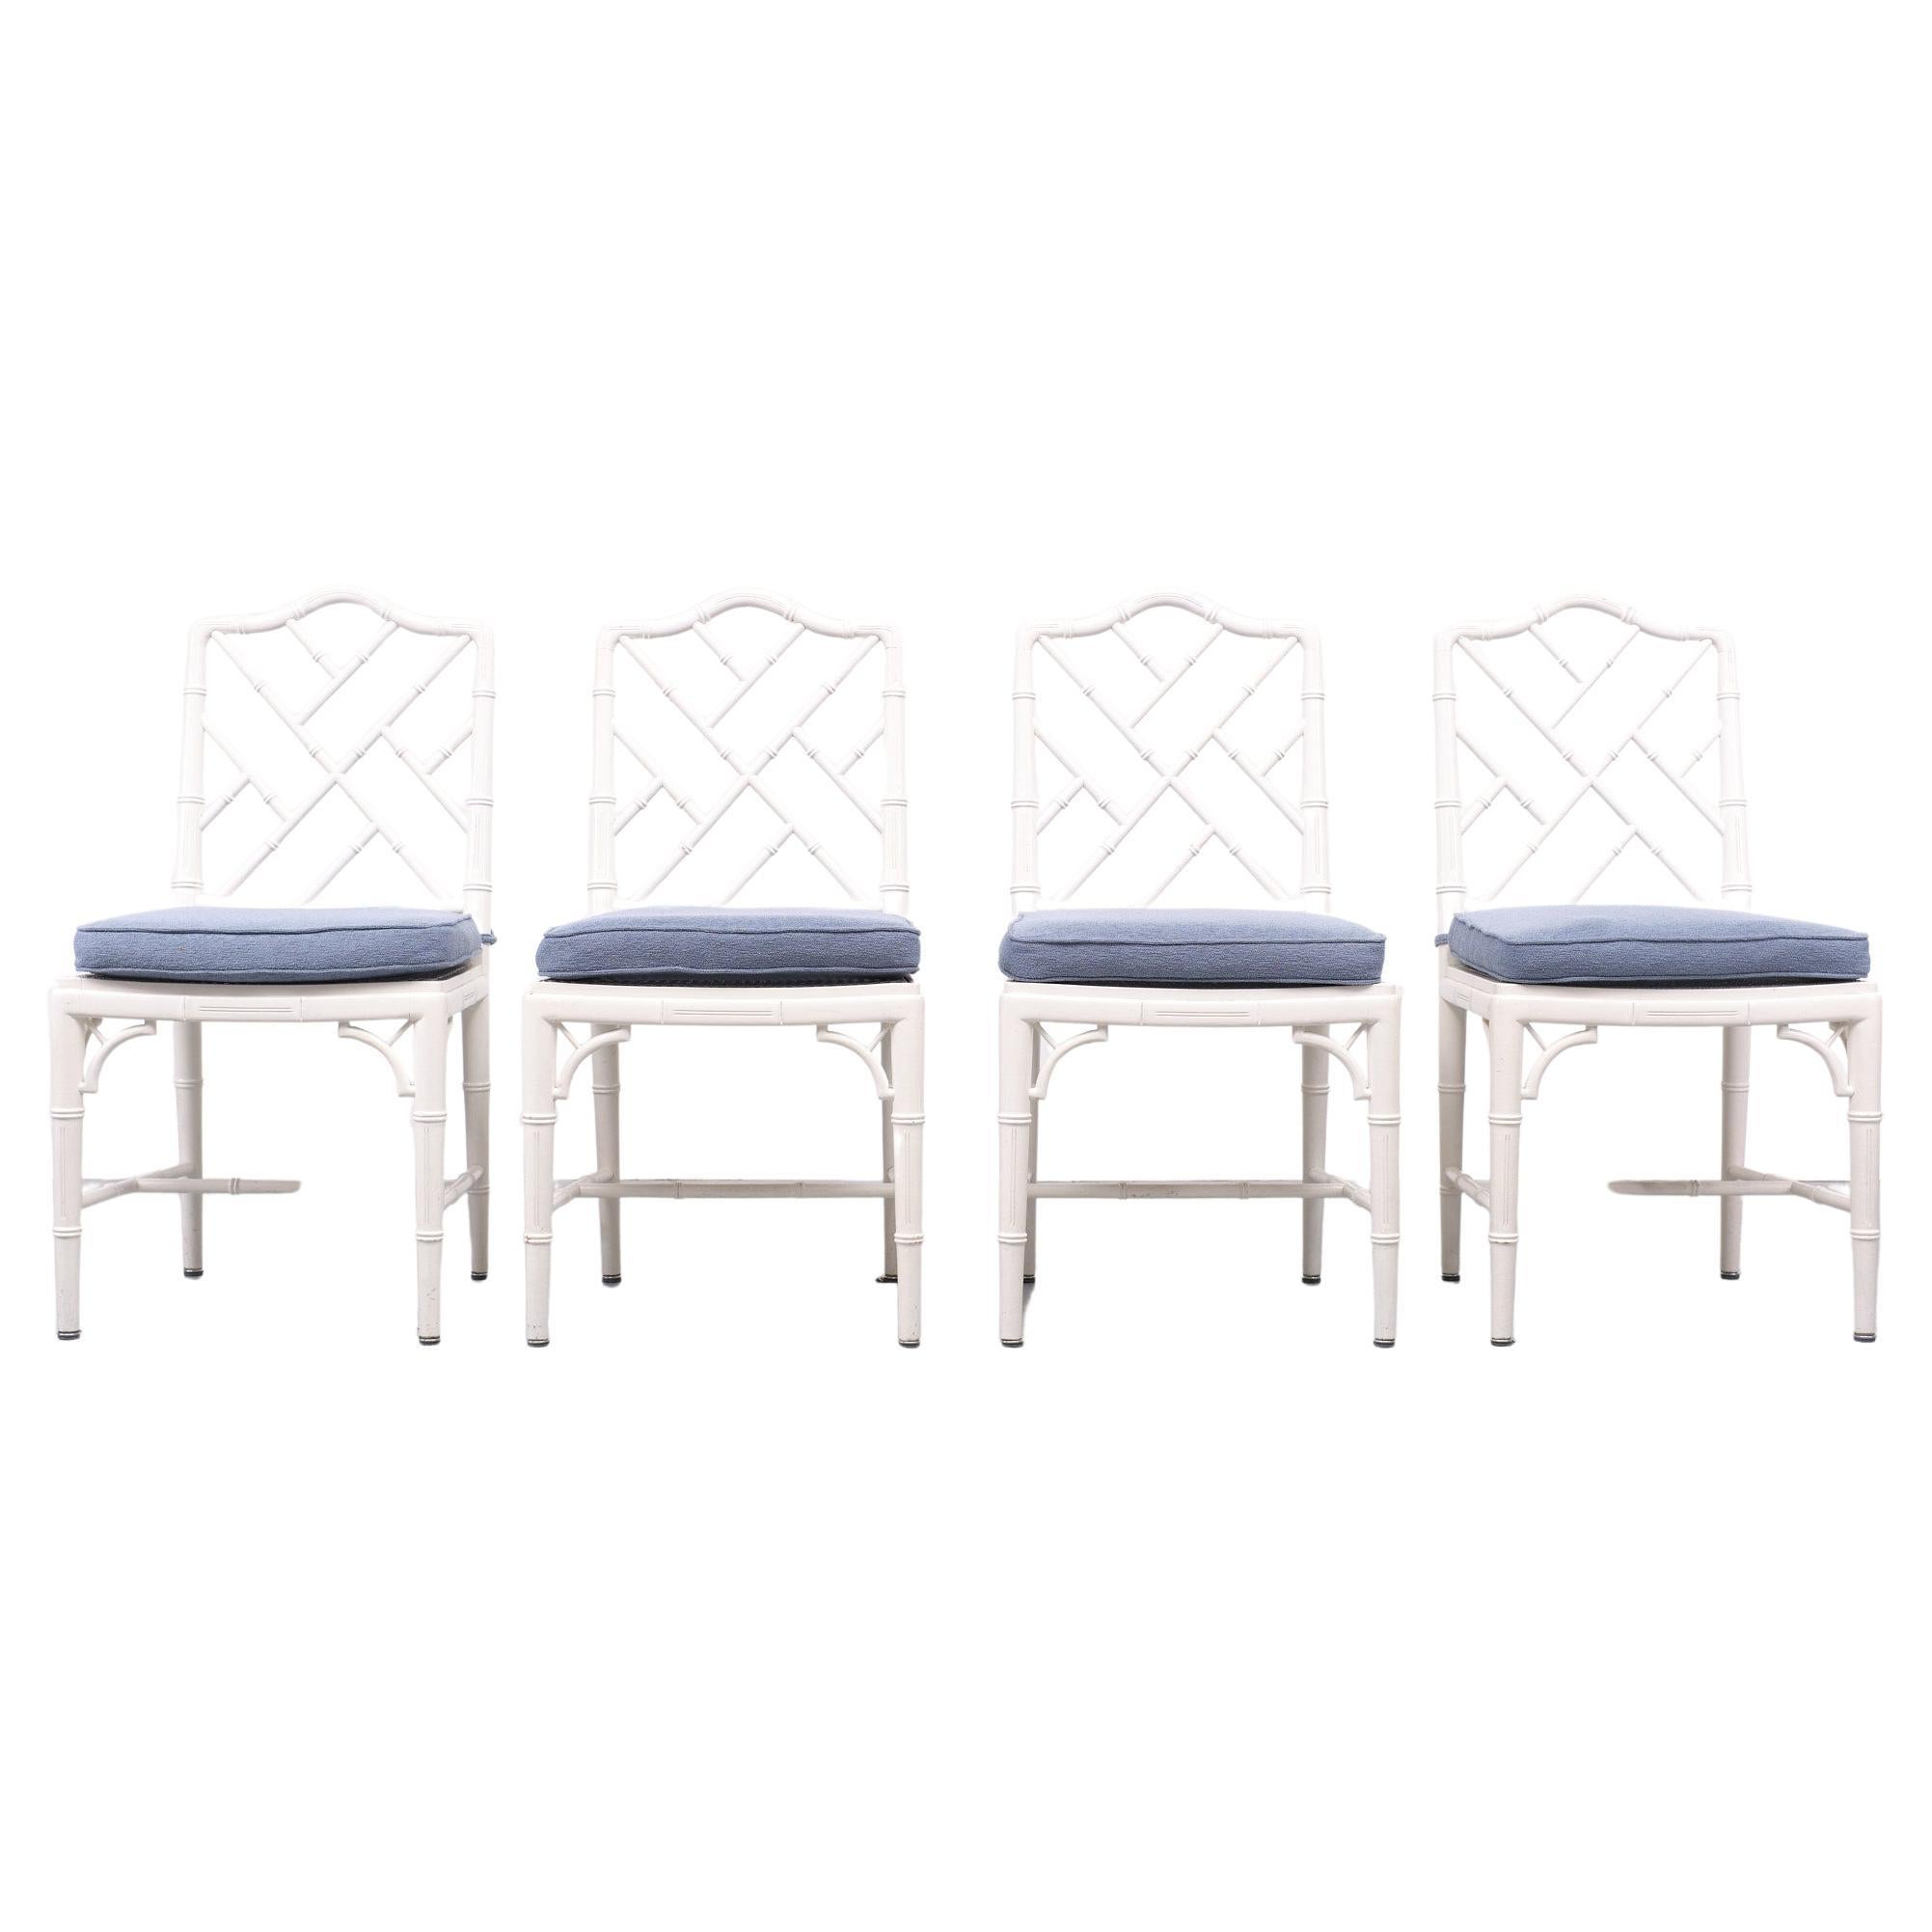 Very nice set of 4 Chinese Chippendale dining chairs. Bright White color. Rattan seating 
comes with baby Blue cushions. Nice and freshly wash. Very good condition.
good quality chairs.